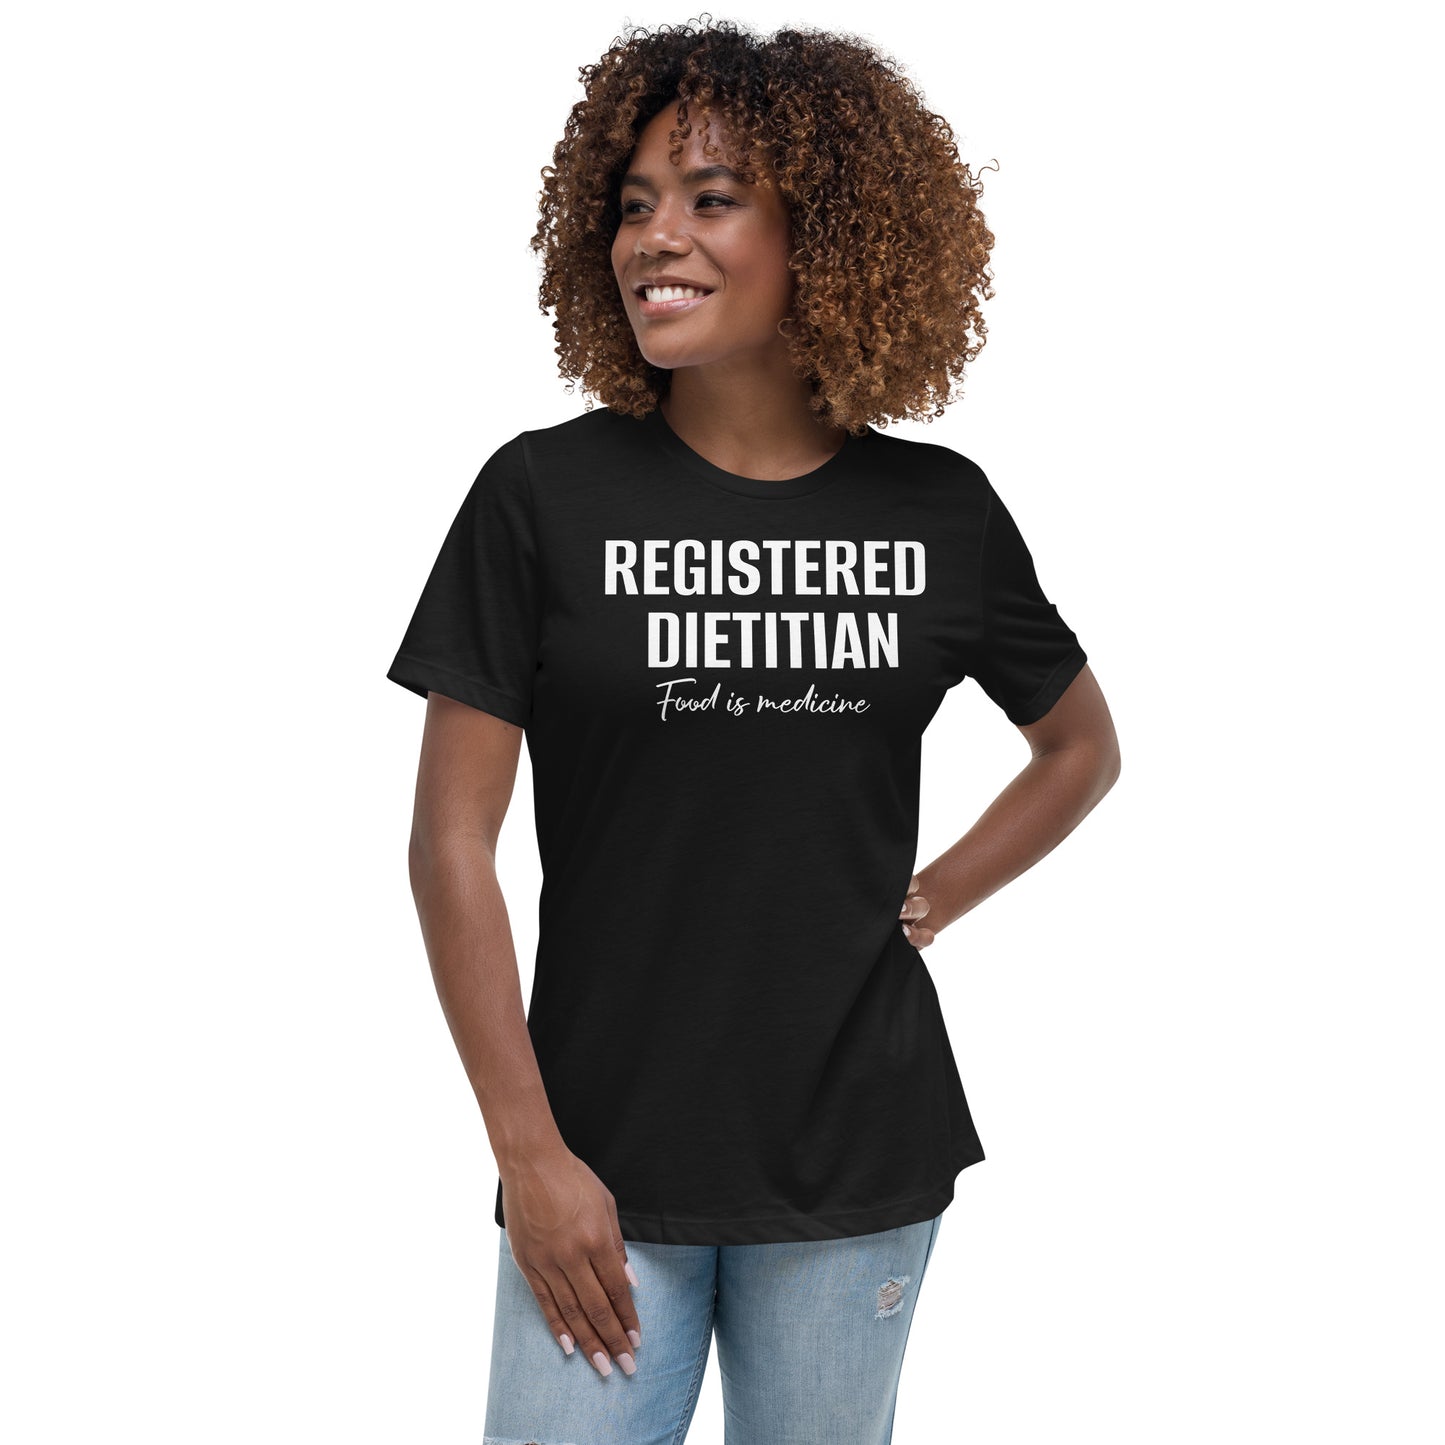 Registered Dietitian/Food is medicine - Women's Relaxed T-Shirt